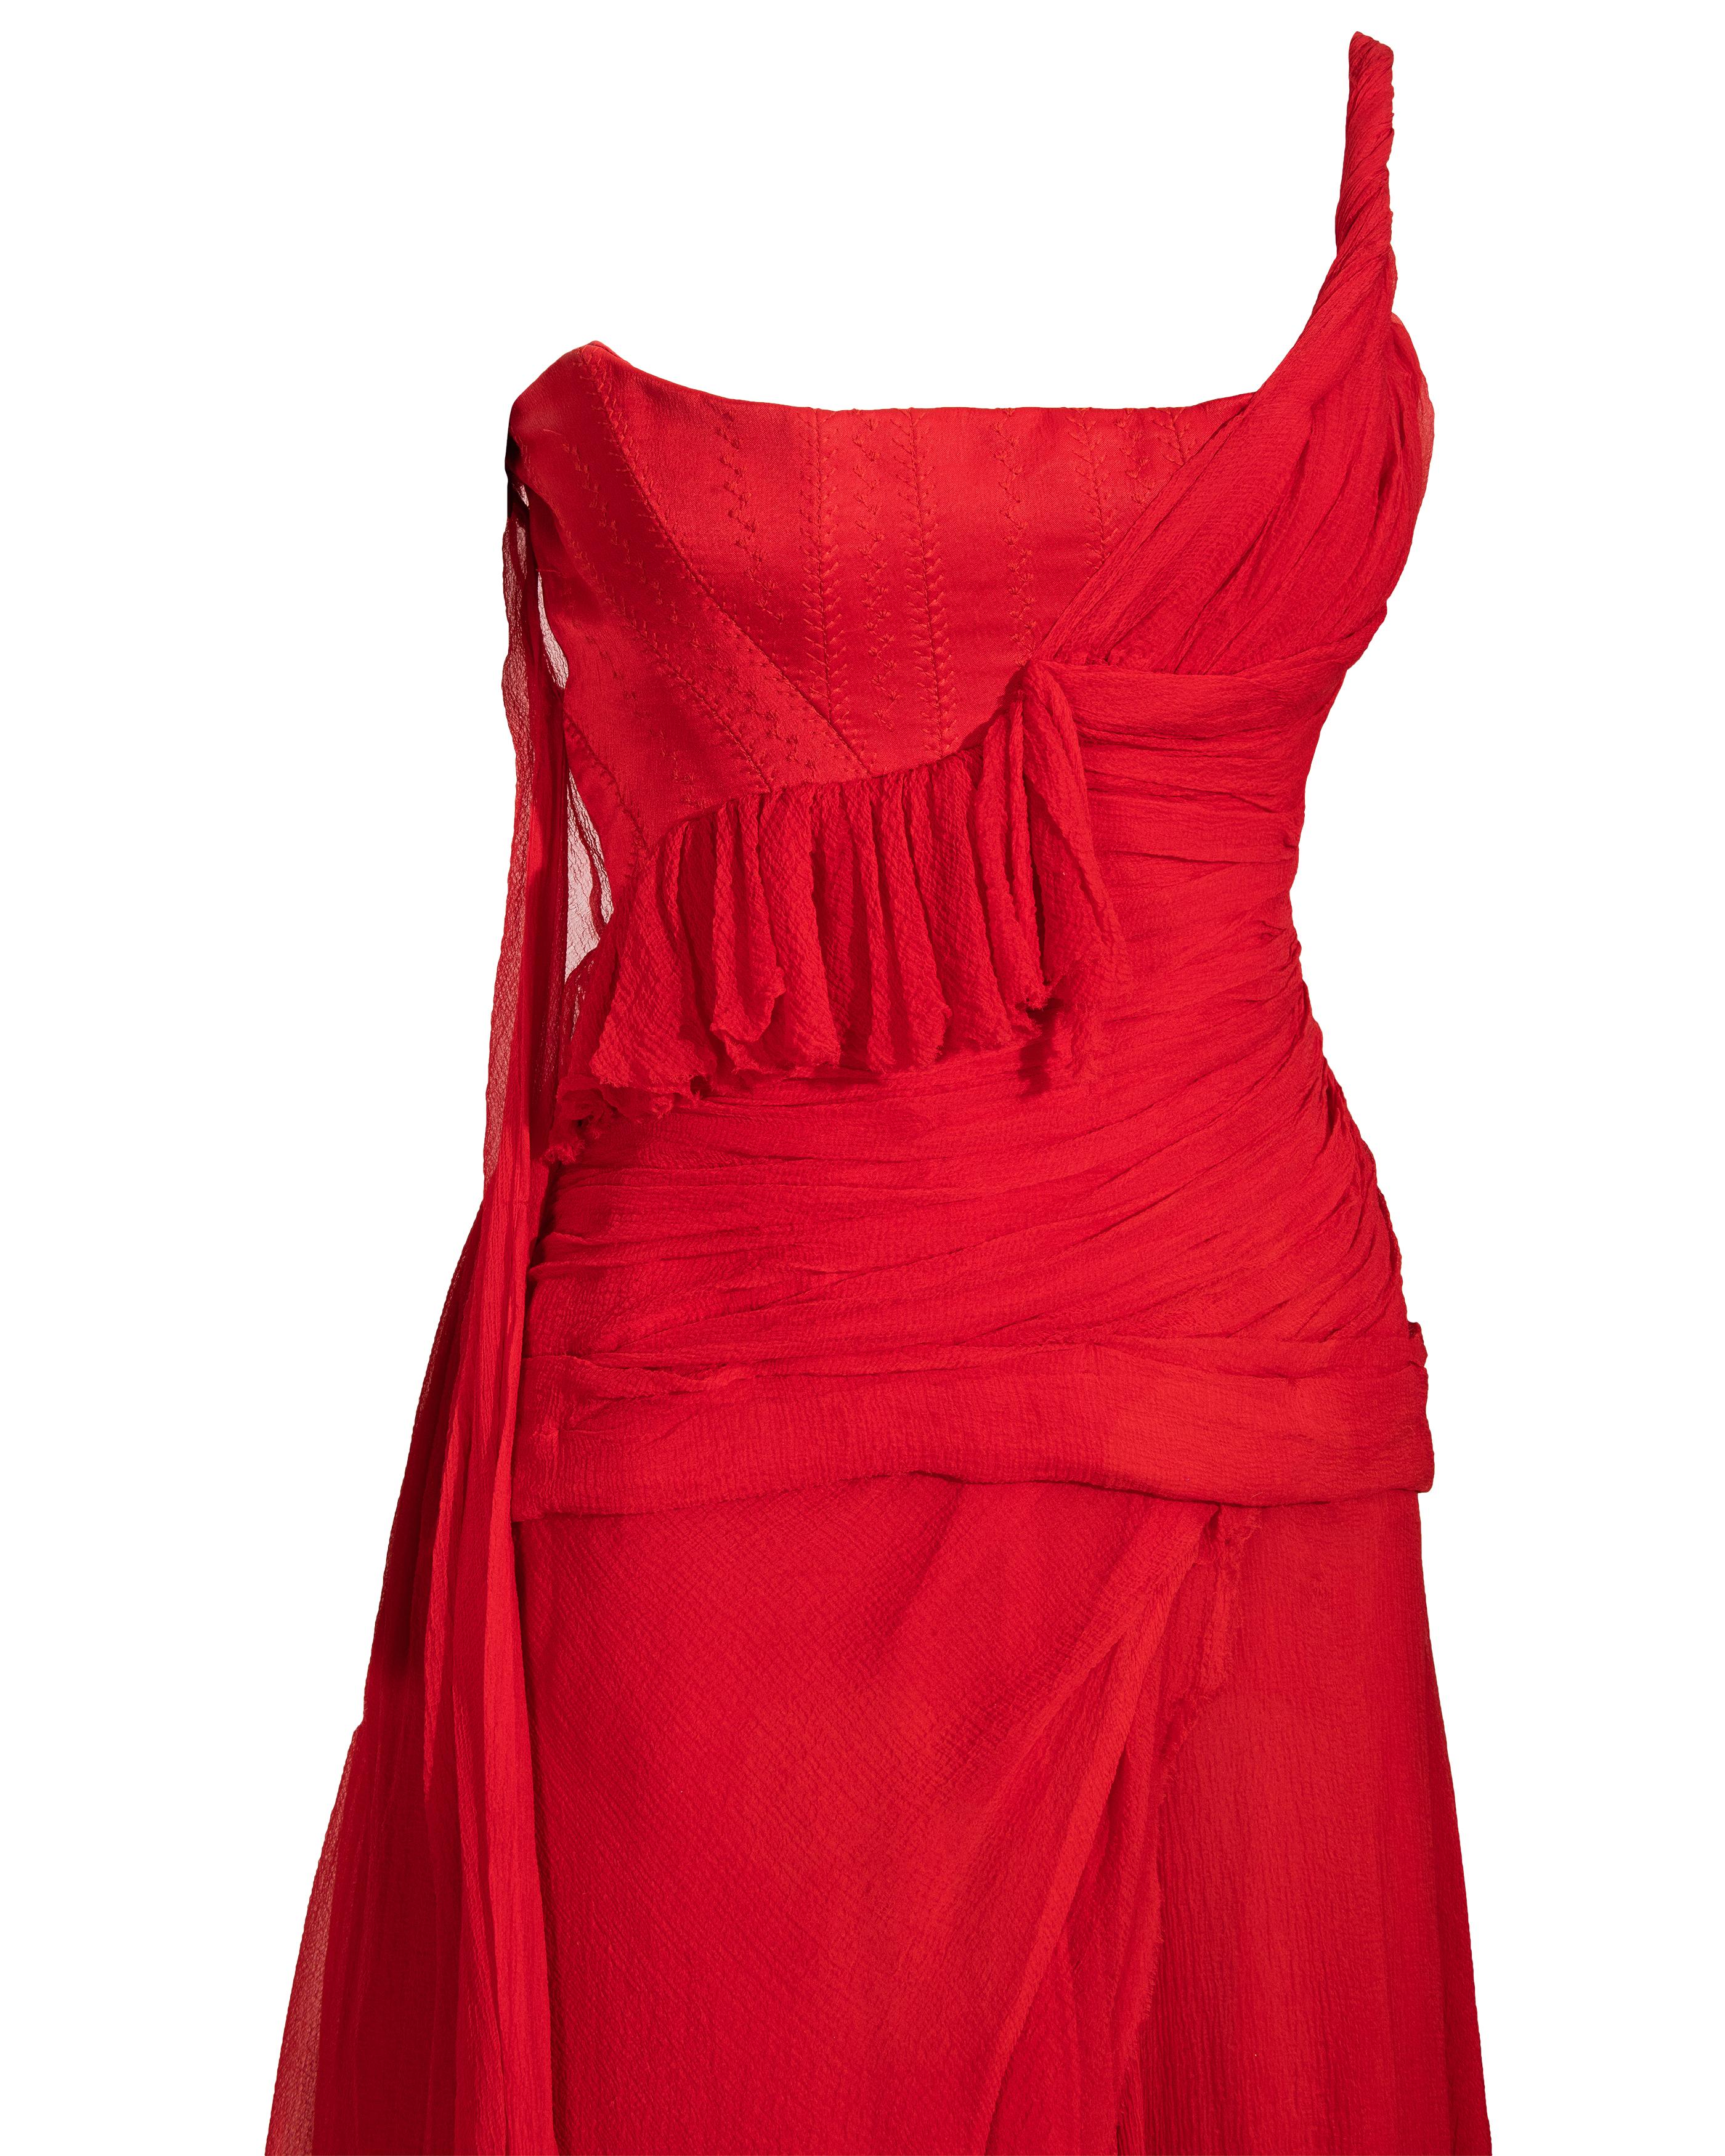 S/S 2003 Alexander McQueen  'Irere' Collection Red Silk Chiffon Gown with Sash 7